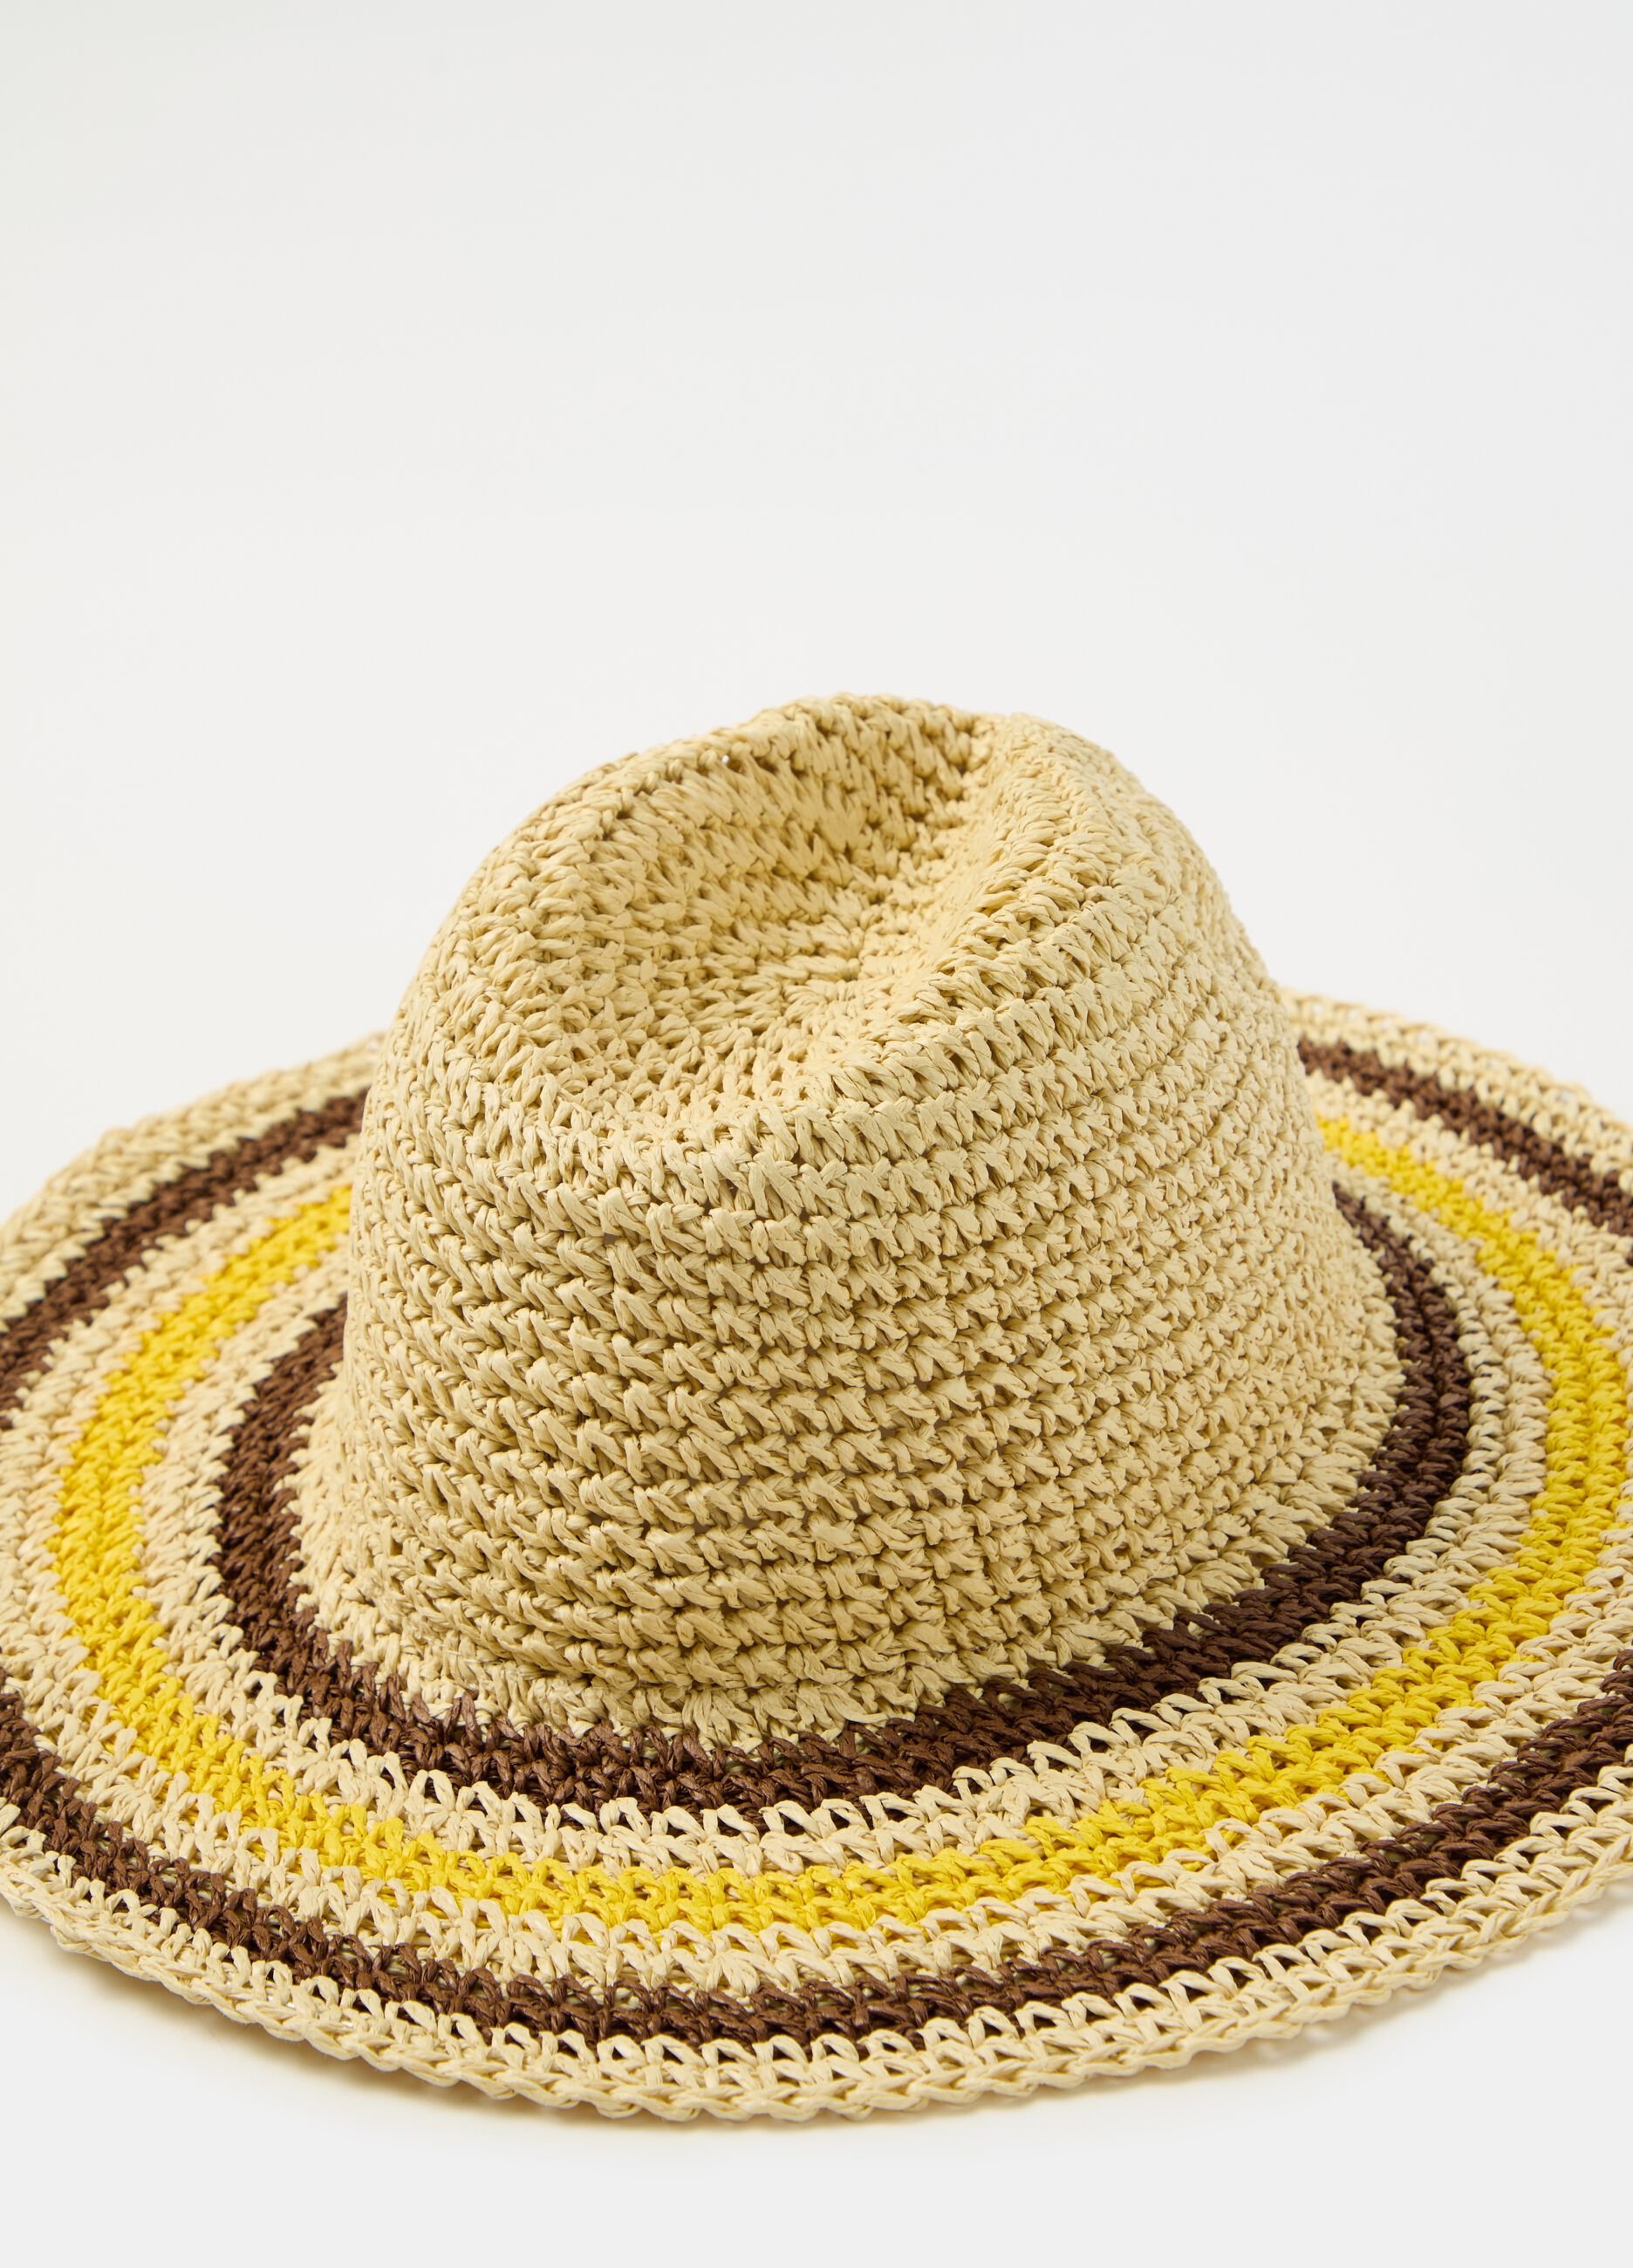 Straw hat with striped detail